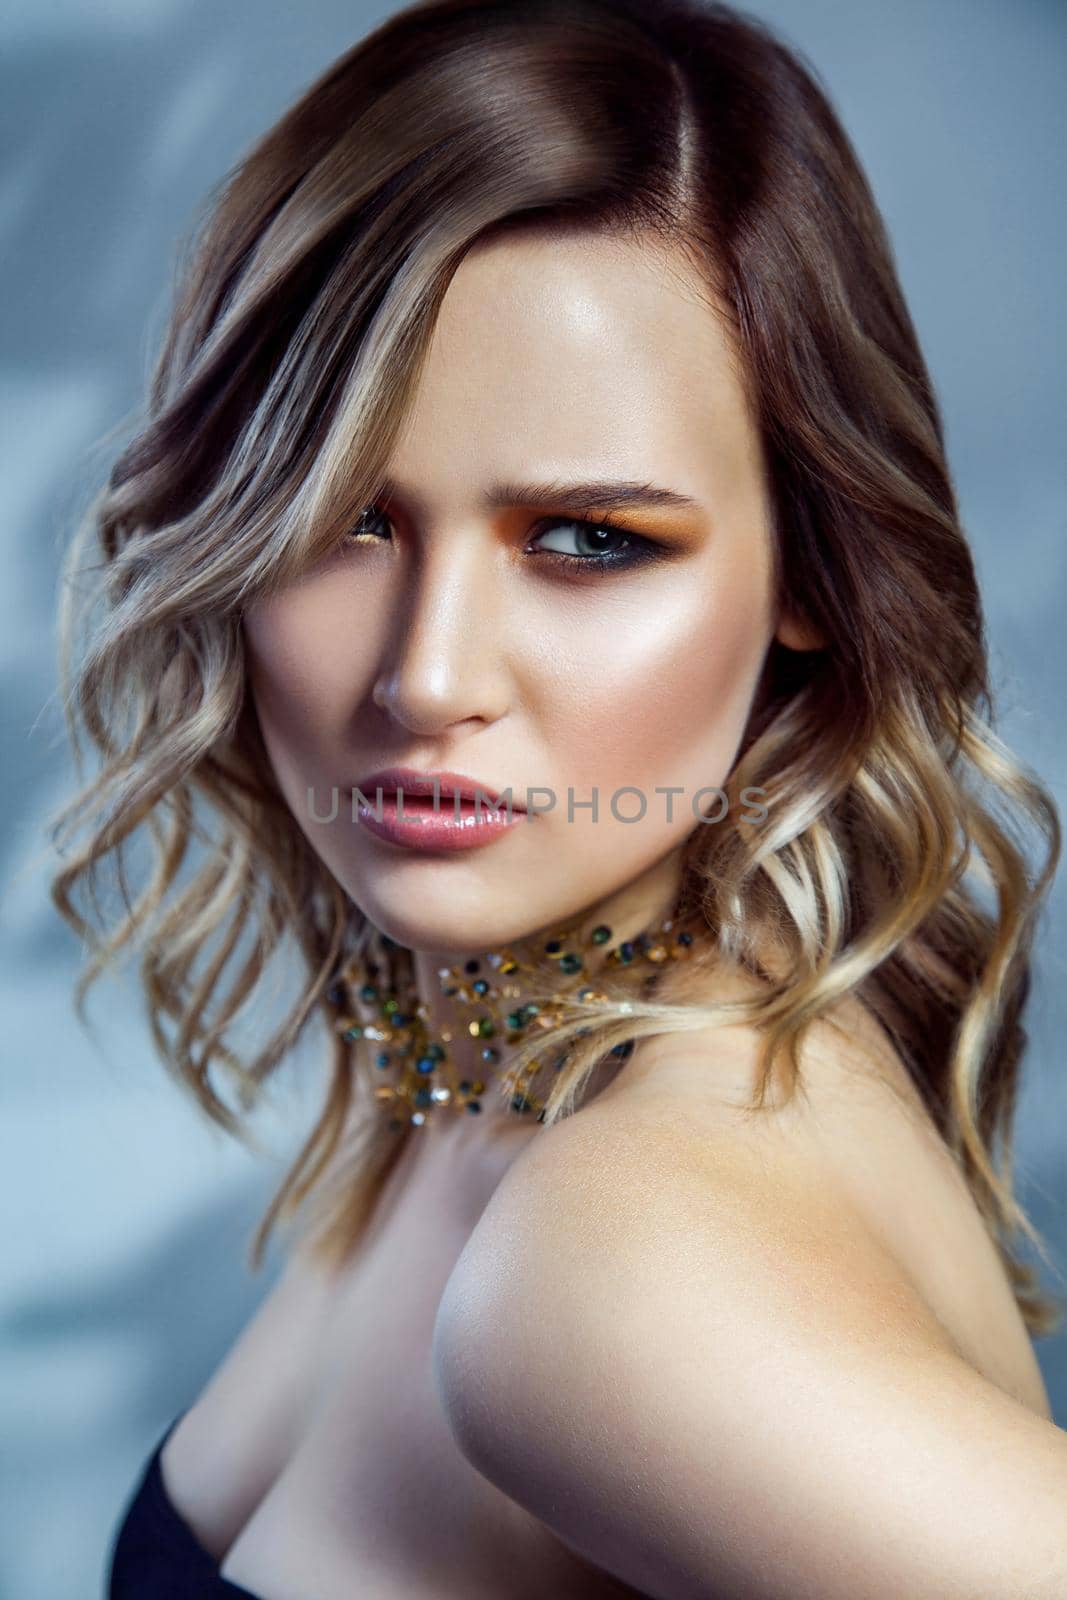 Beauty portrait of beautiful fashion model with makeup, colored wavy hairstyle and accessories on her neck. by Khosro1